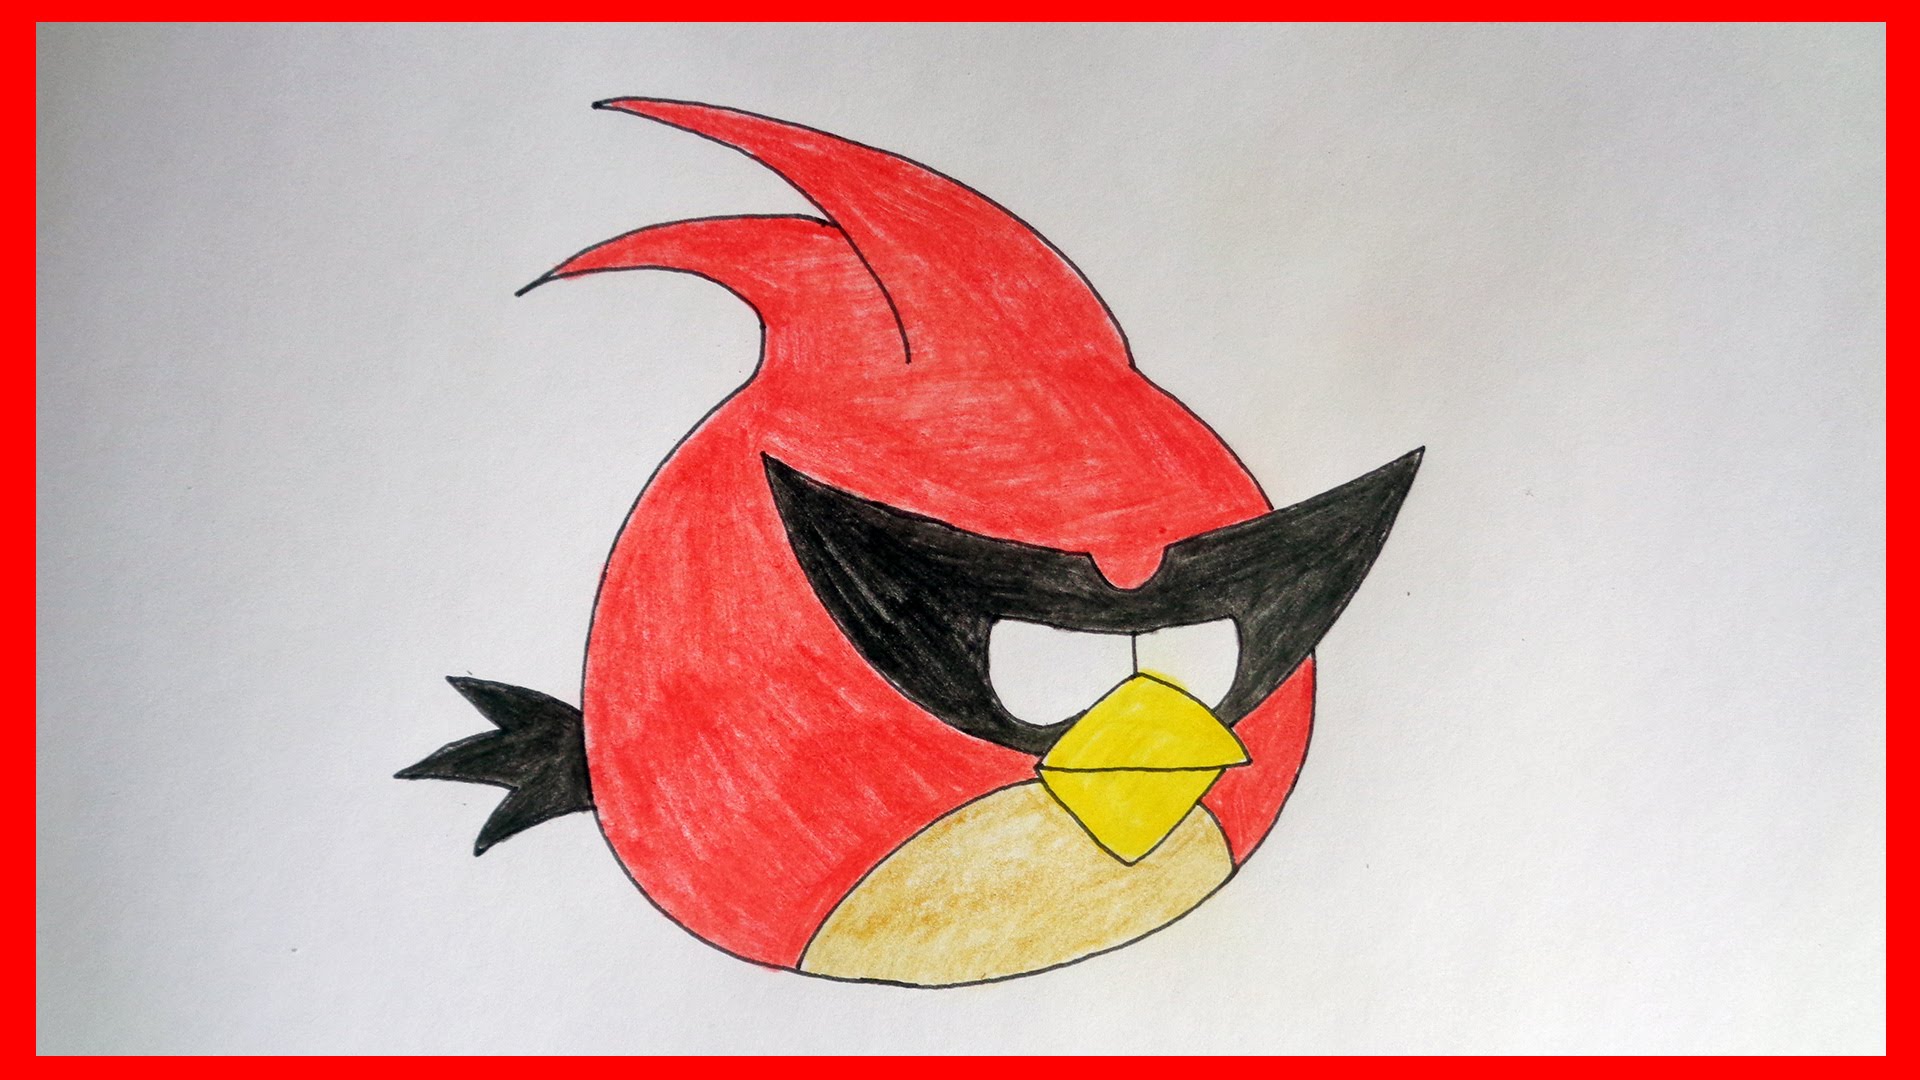 1920x1080 How To Draw Super Red Bird From Angry Birds Space.